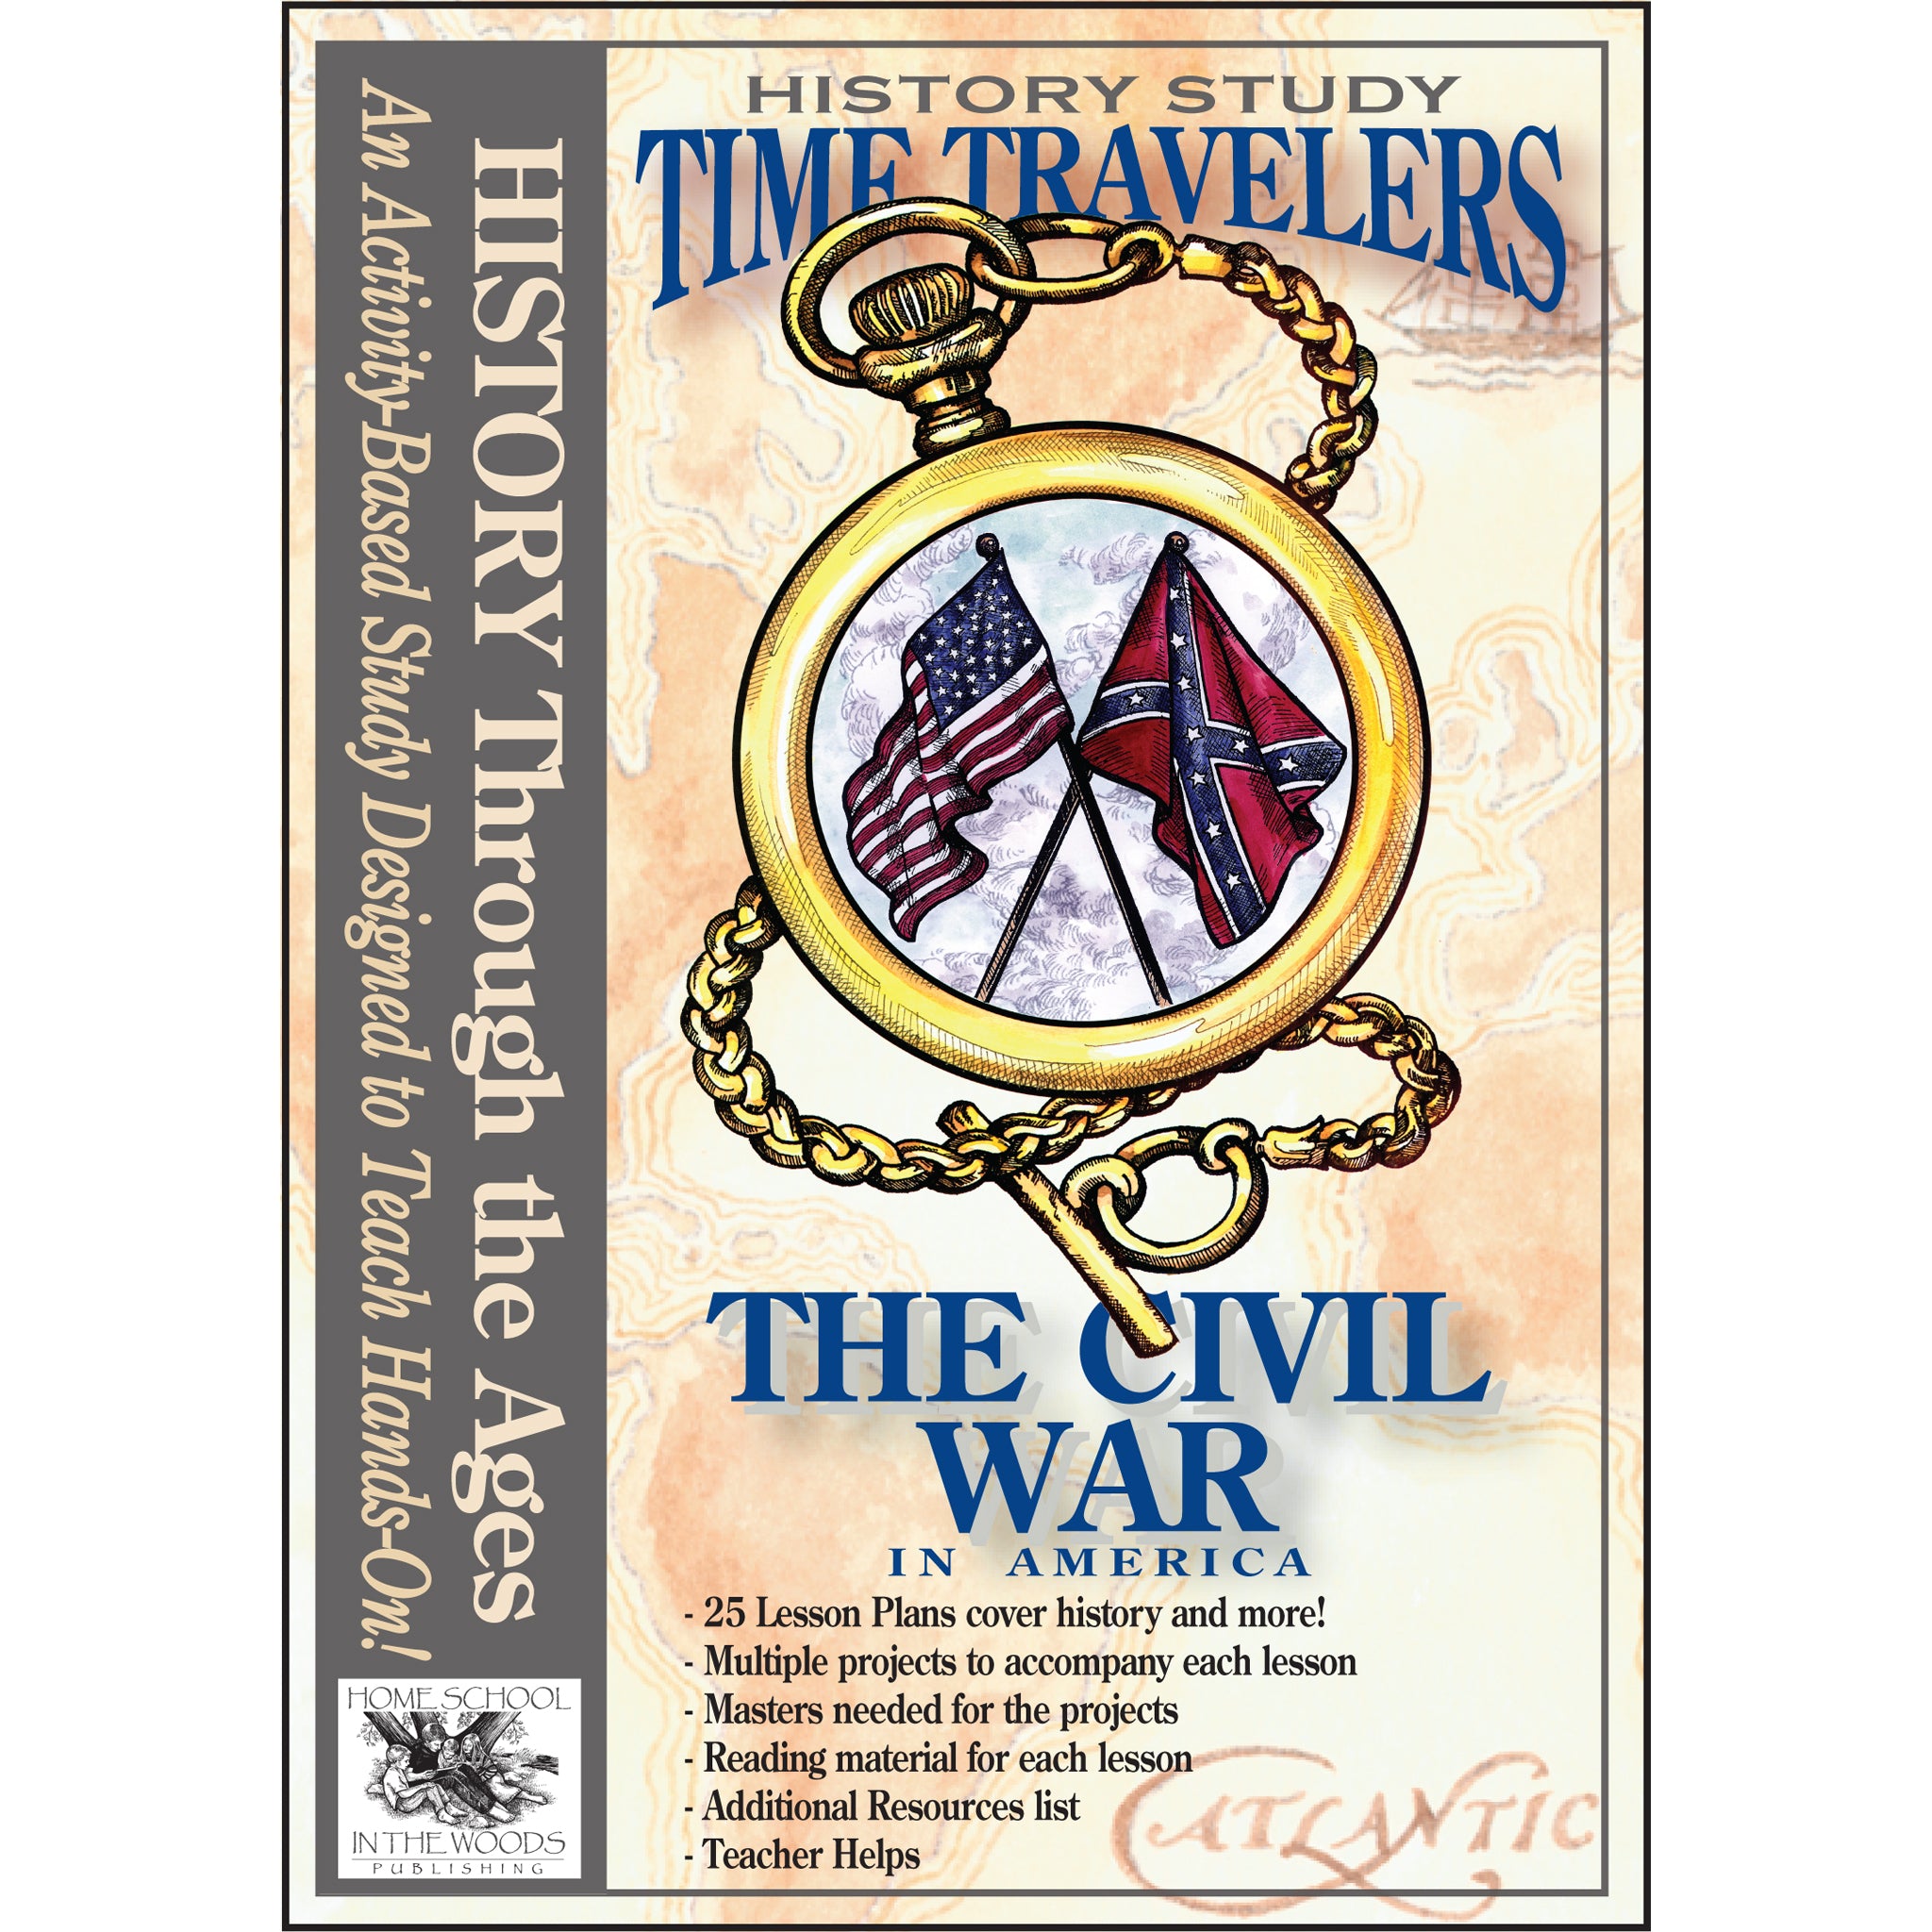 Time Travelers: The Civil War U.S. History Study – Home School the Woods Publishing